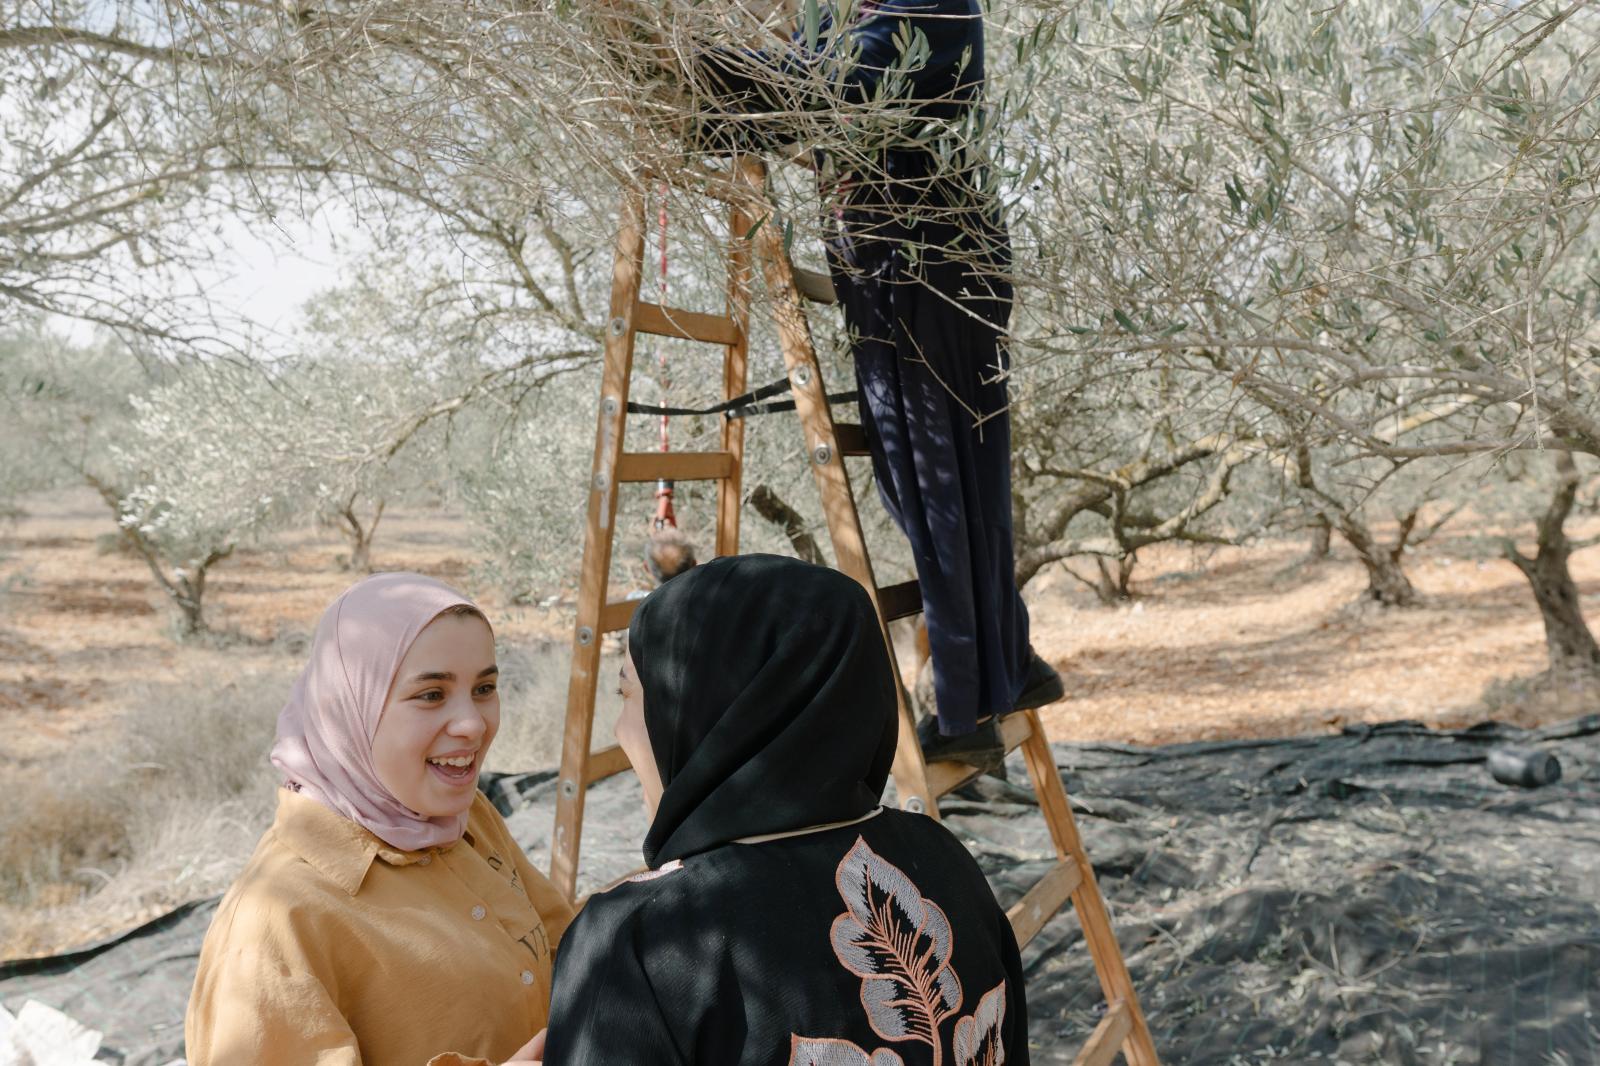 This Time of the Year: Olive Harvest in the Village of Awarta